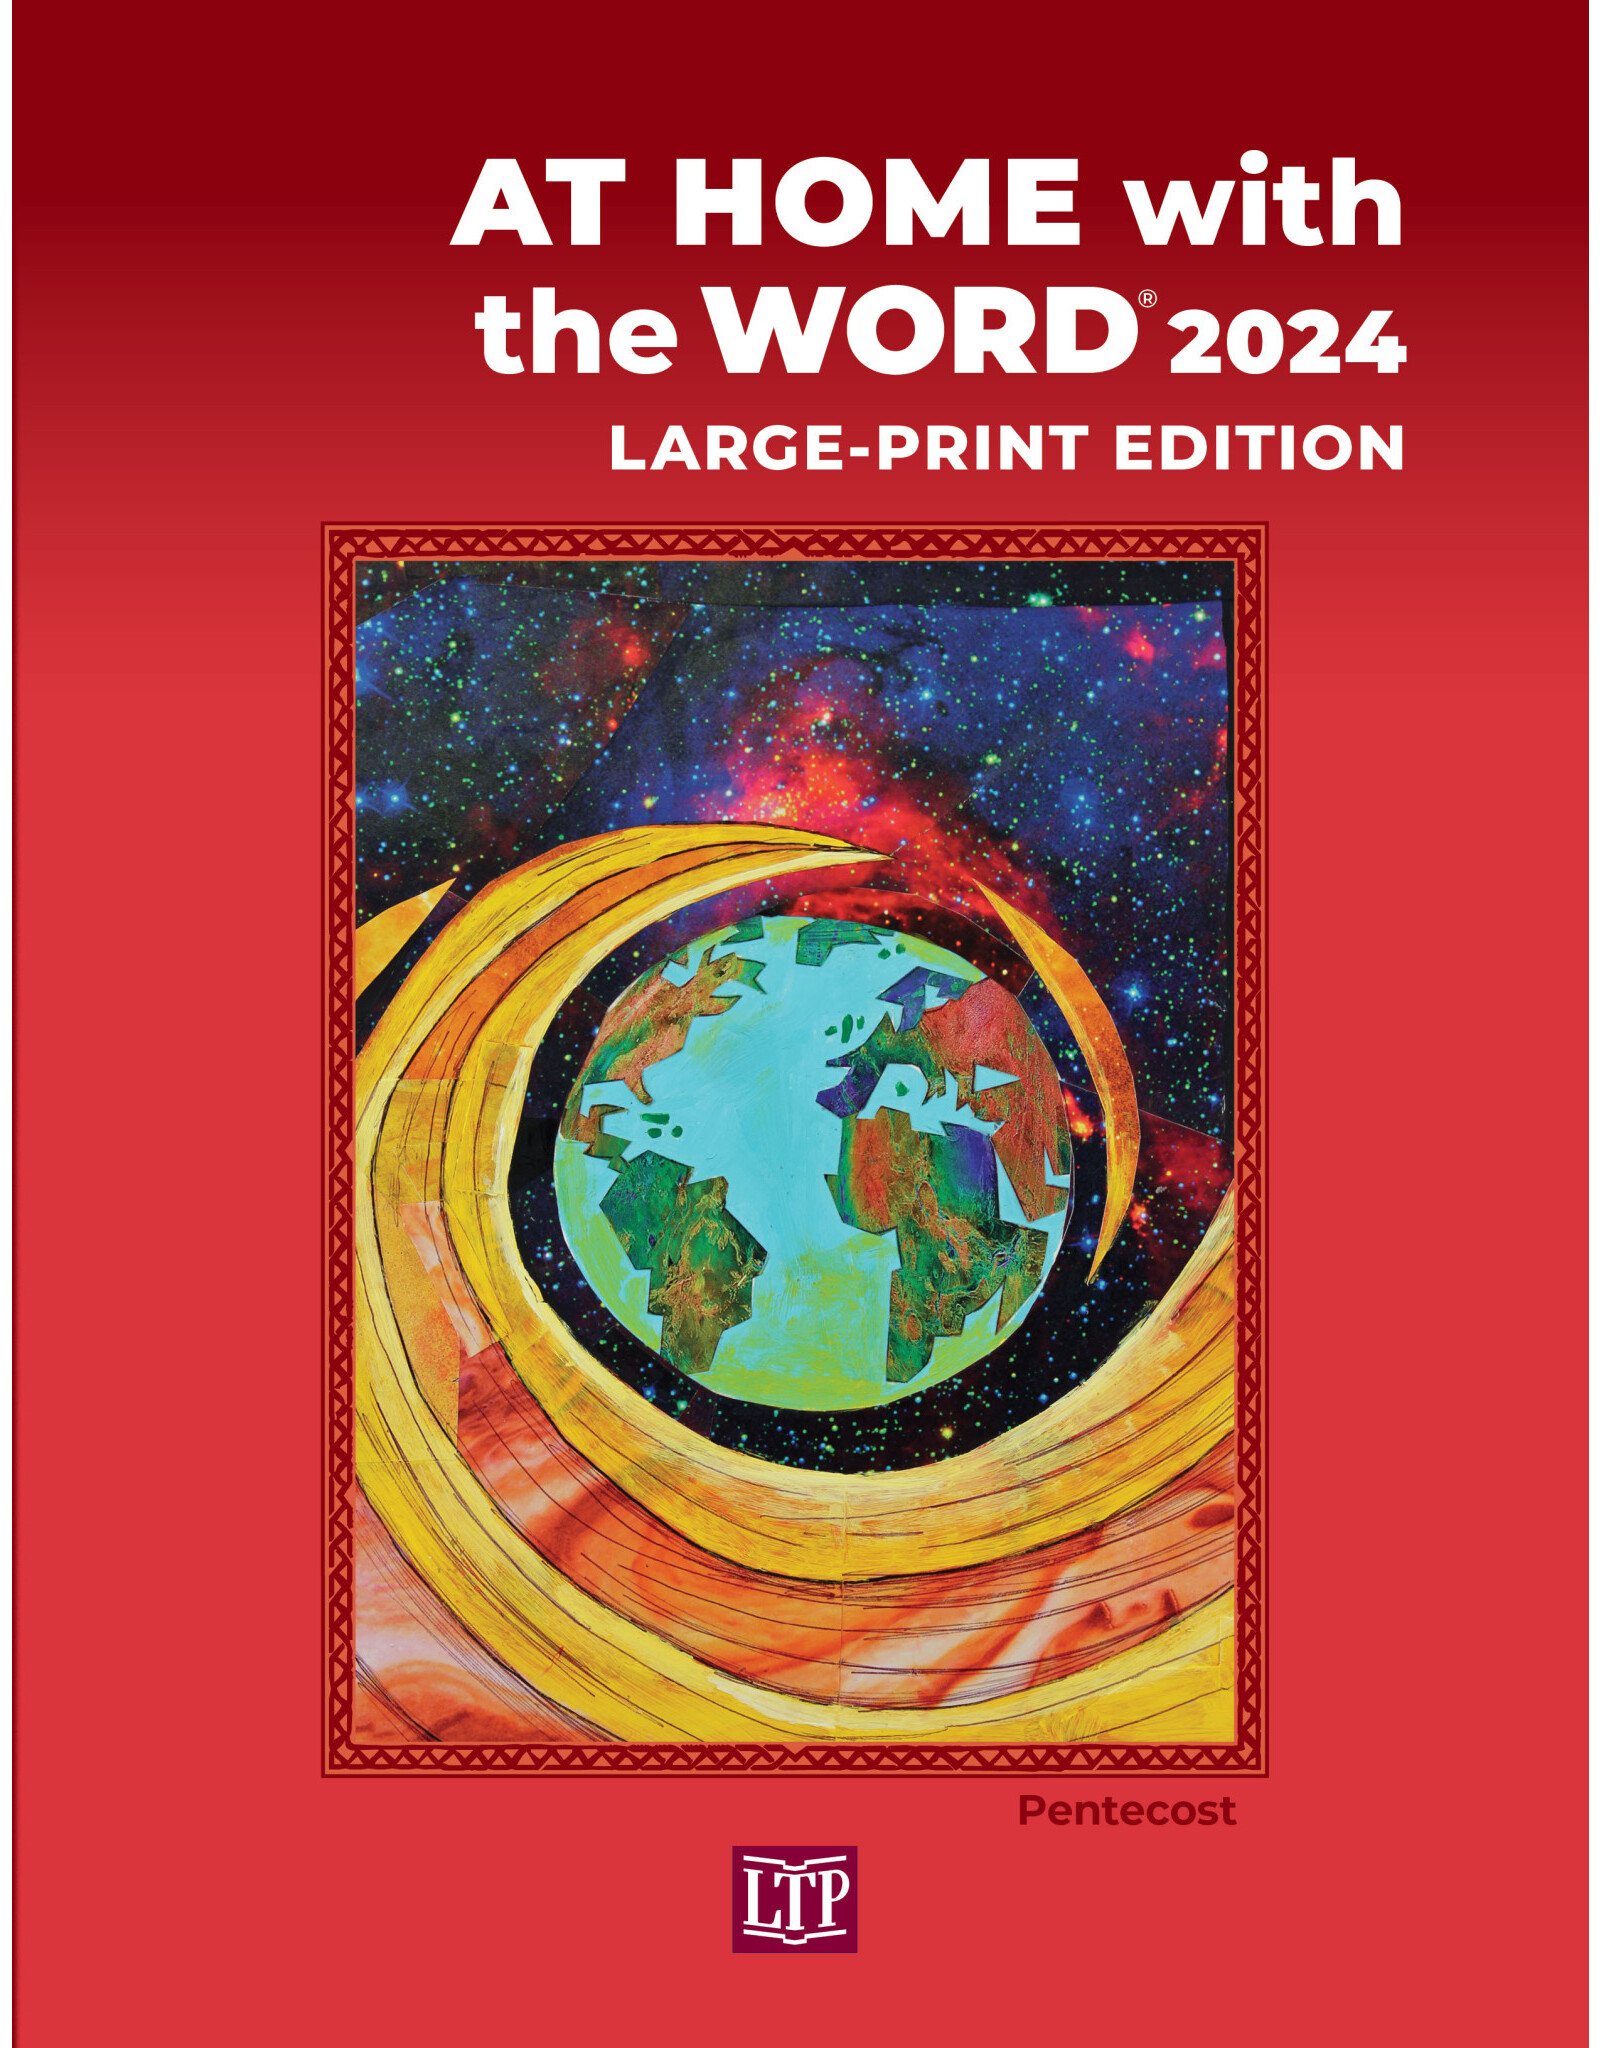 LTP (Liturgy Training Publications) 2024 At Home with the Word Large Print